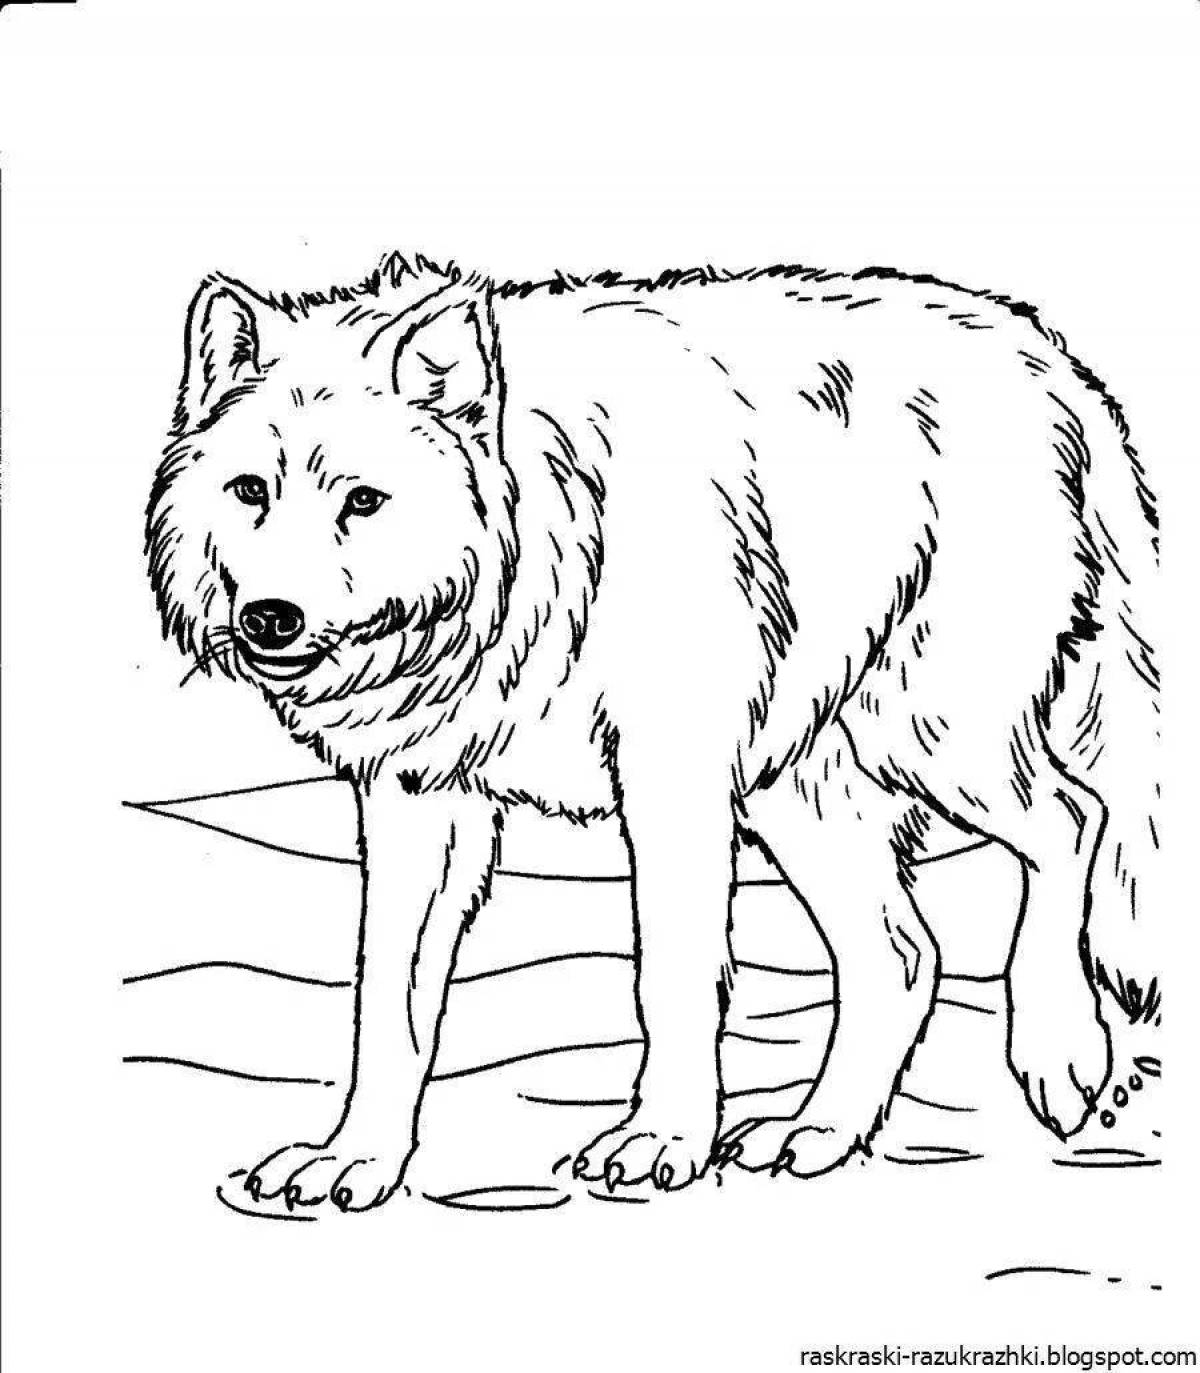 Coloring pages of wild animals for kids